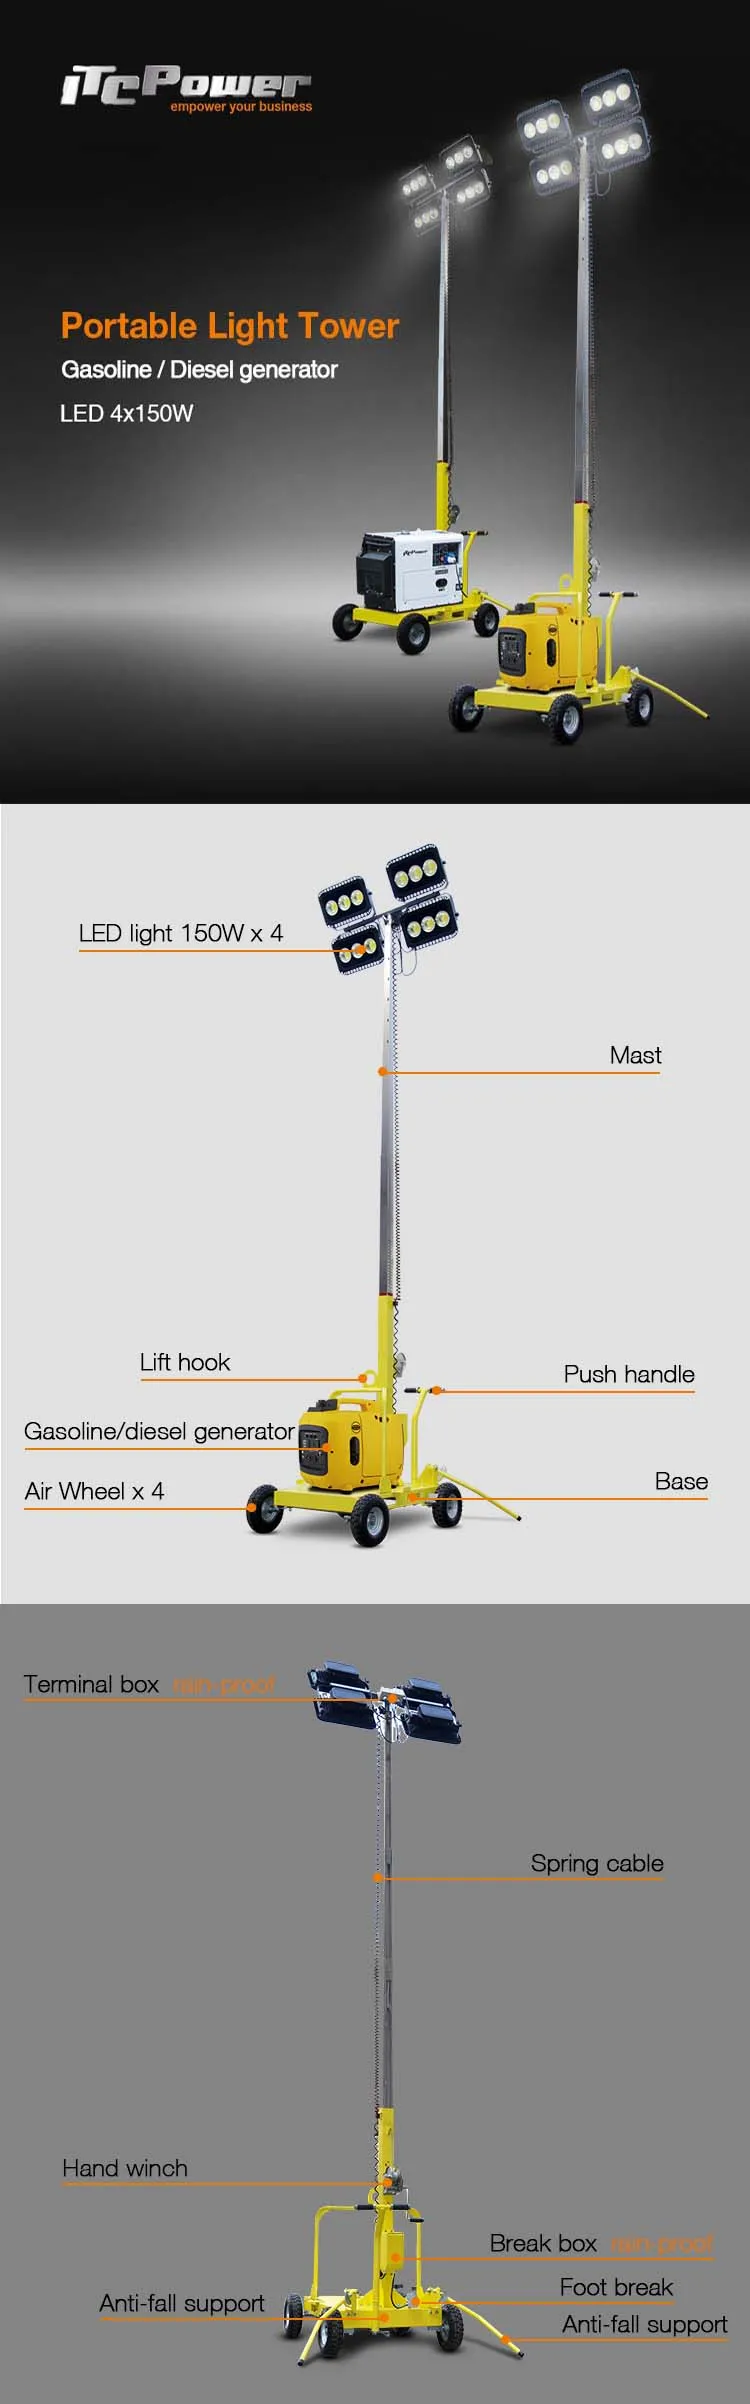 mobile portable light tower with diesel generator